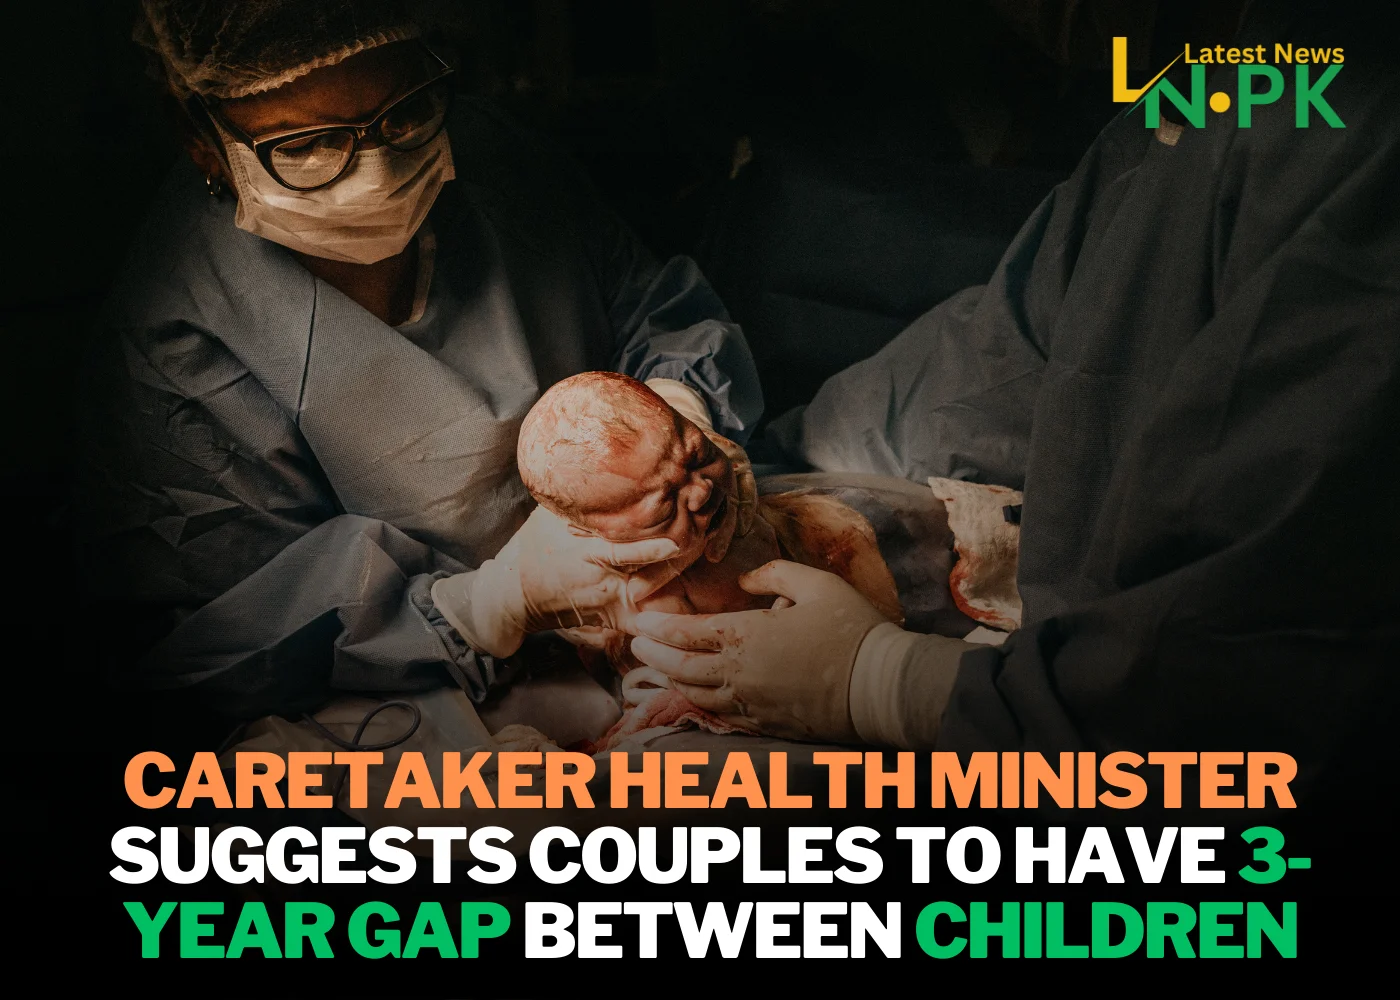 Pakistan's Government Takes Steps to Improve Maternal and Child Health: Couples Advised to Have 3-Year Gap Between Children